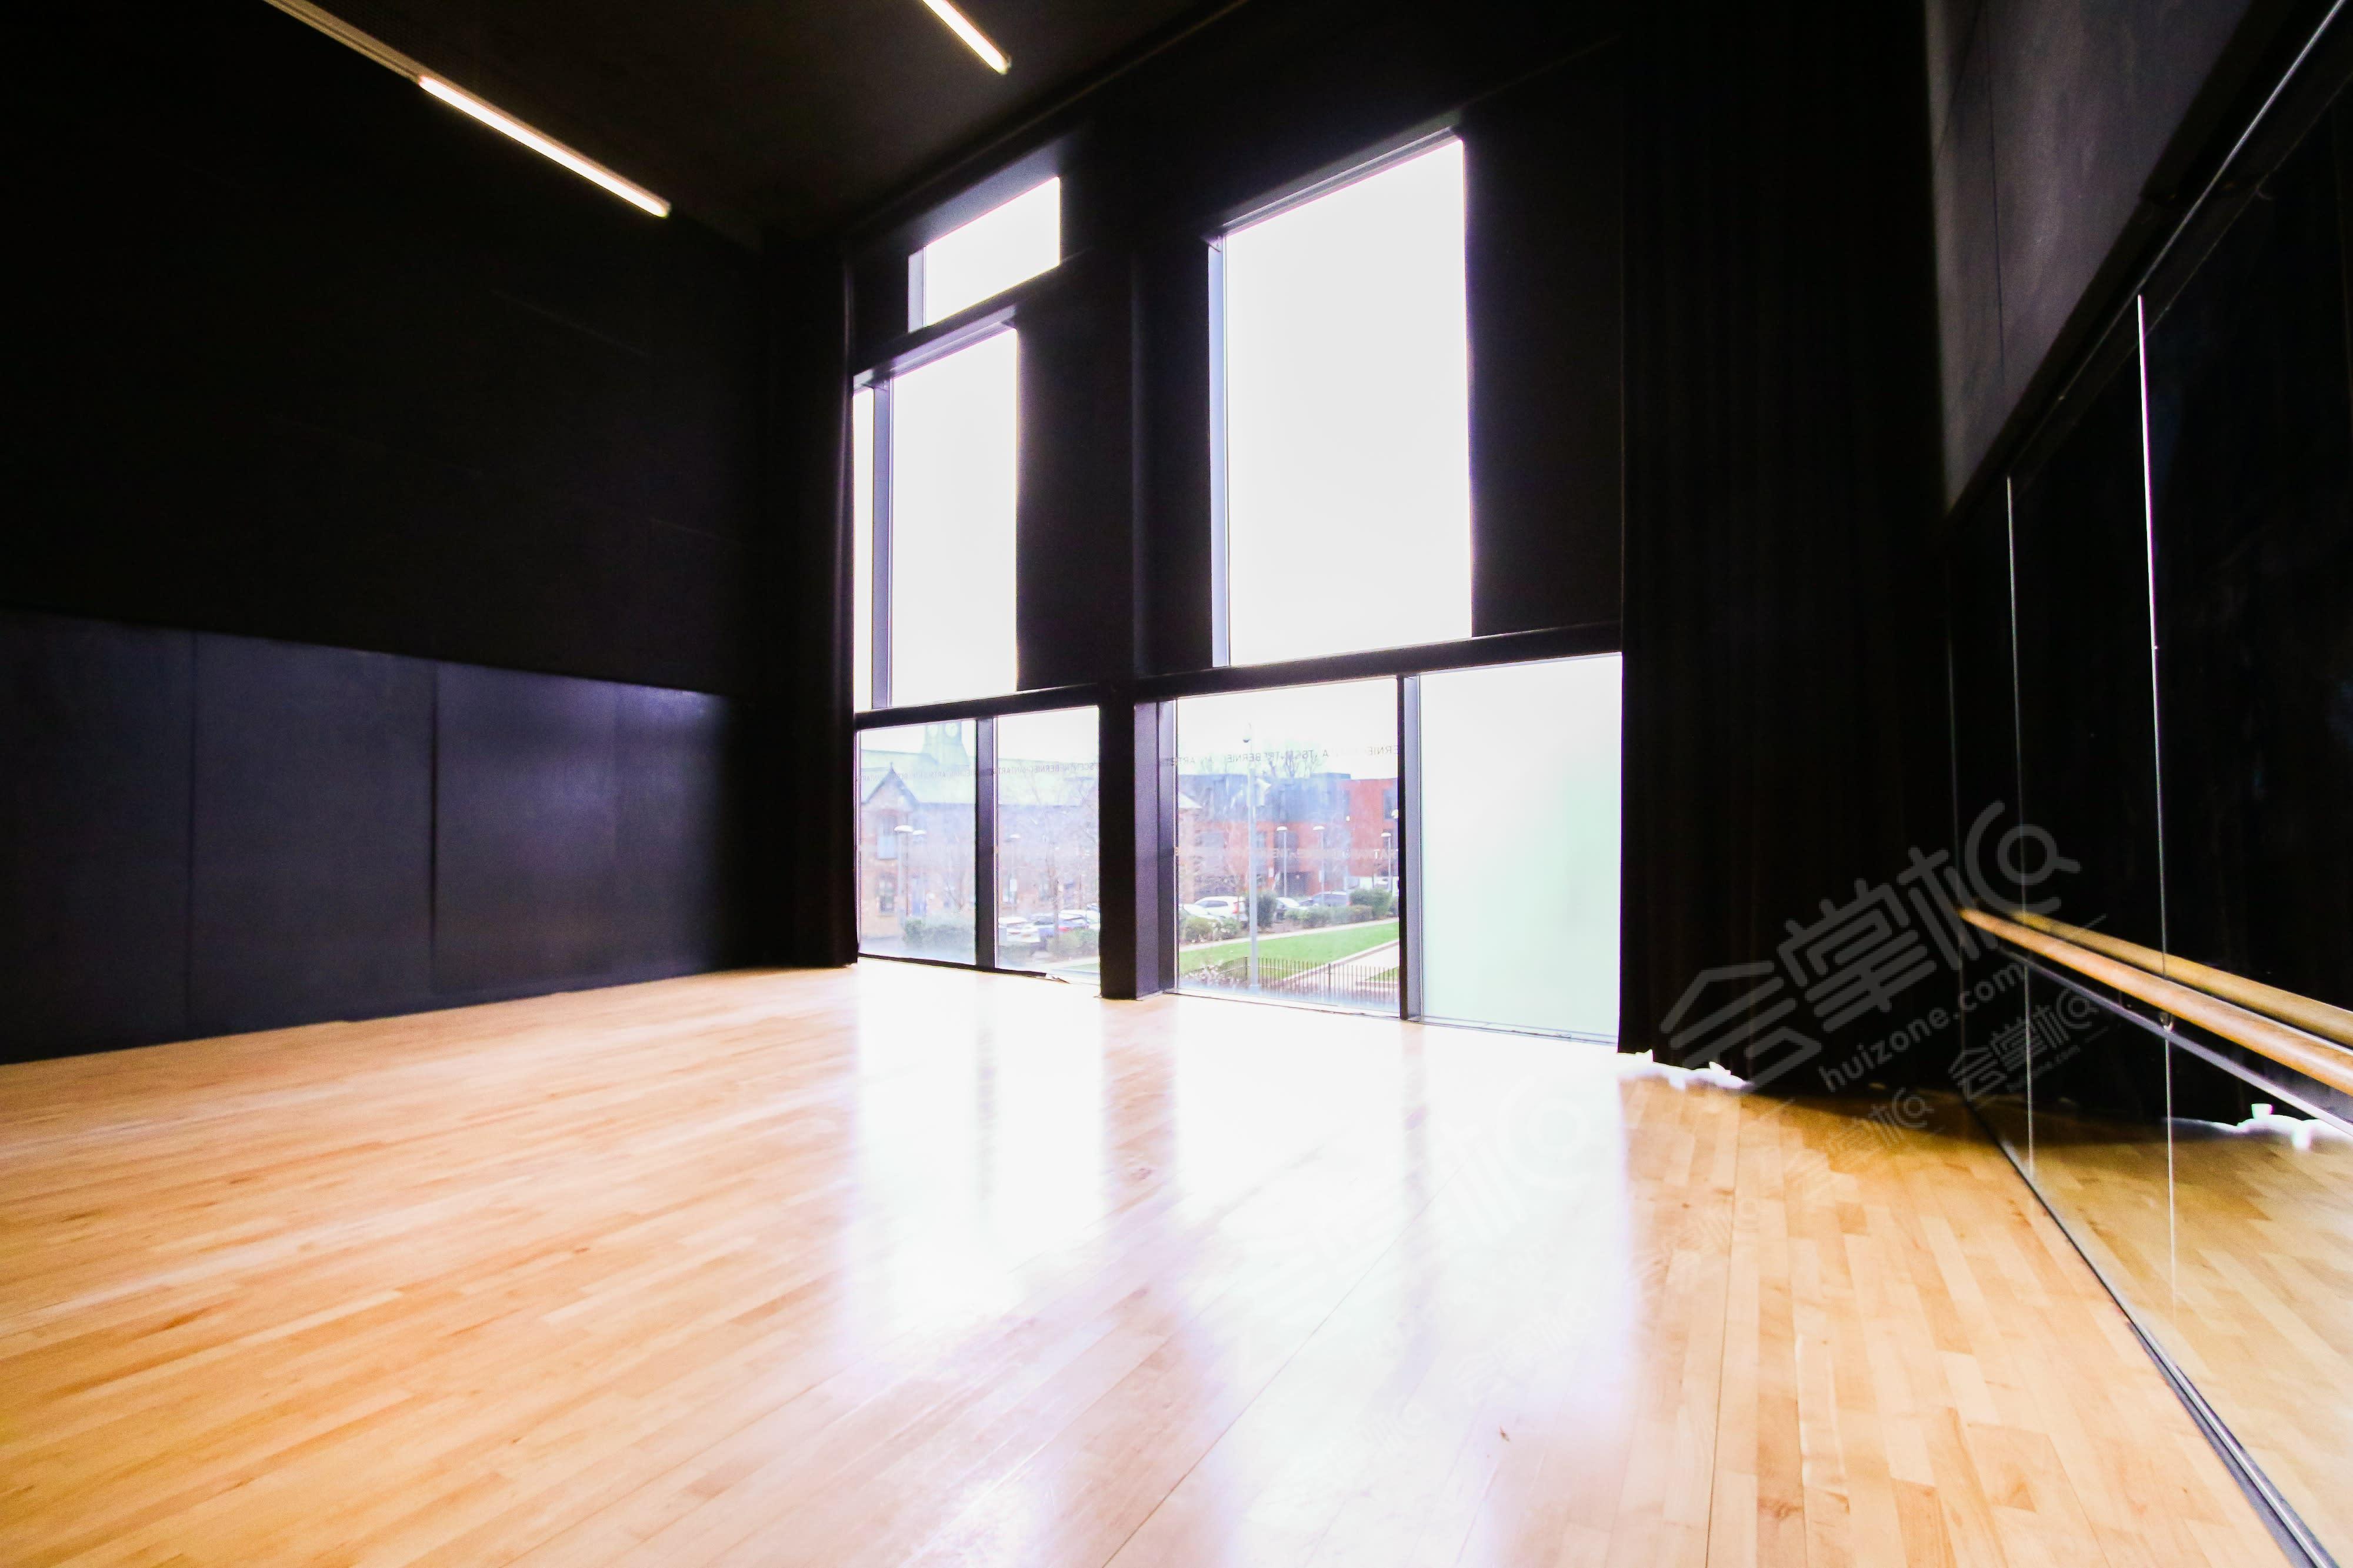 Blackout Film and Rehearsal studio with amazing Windows